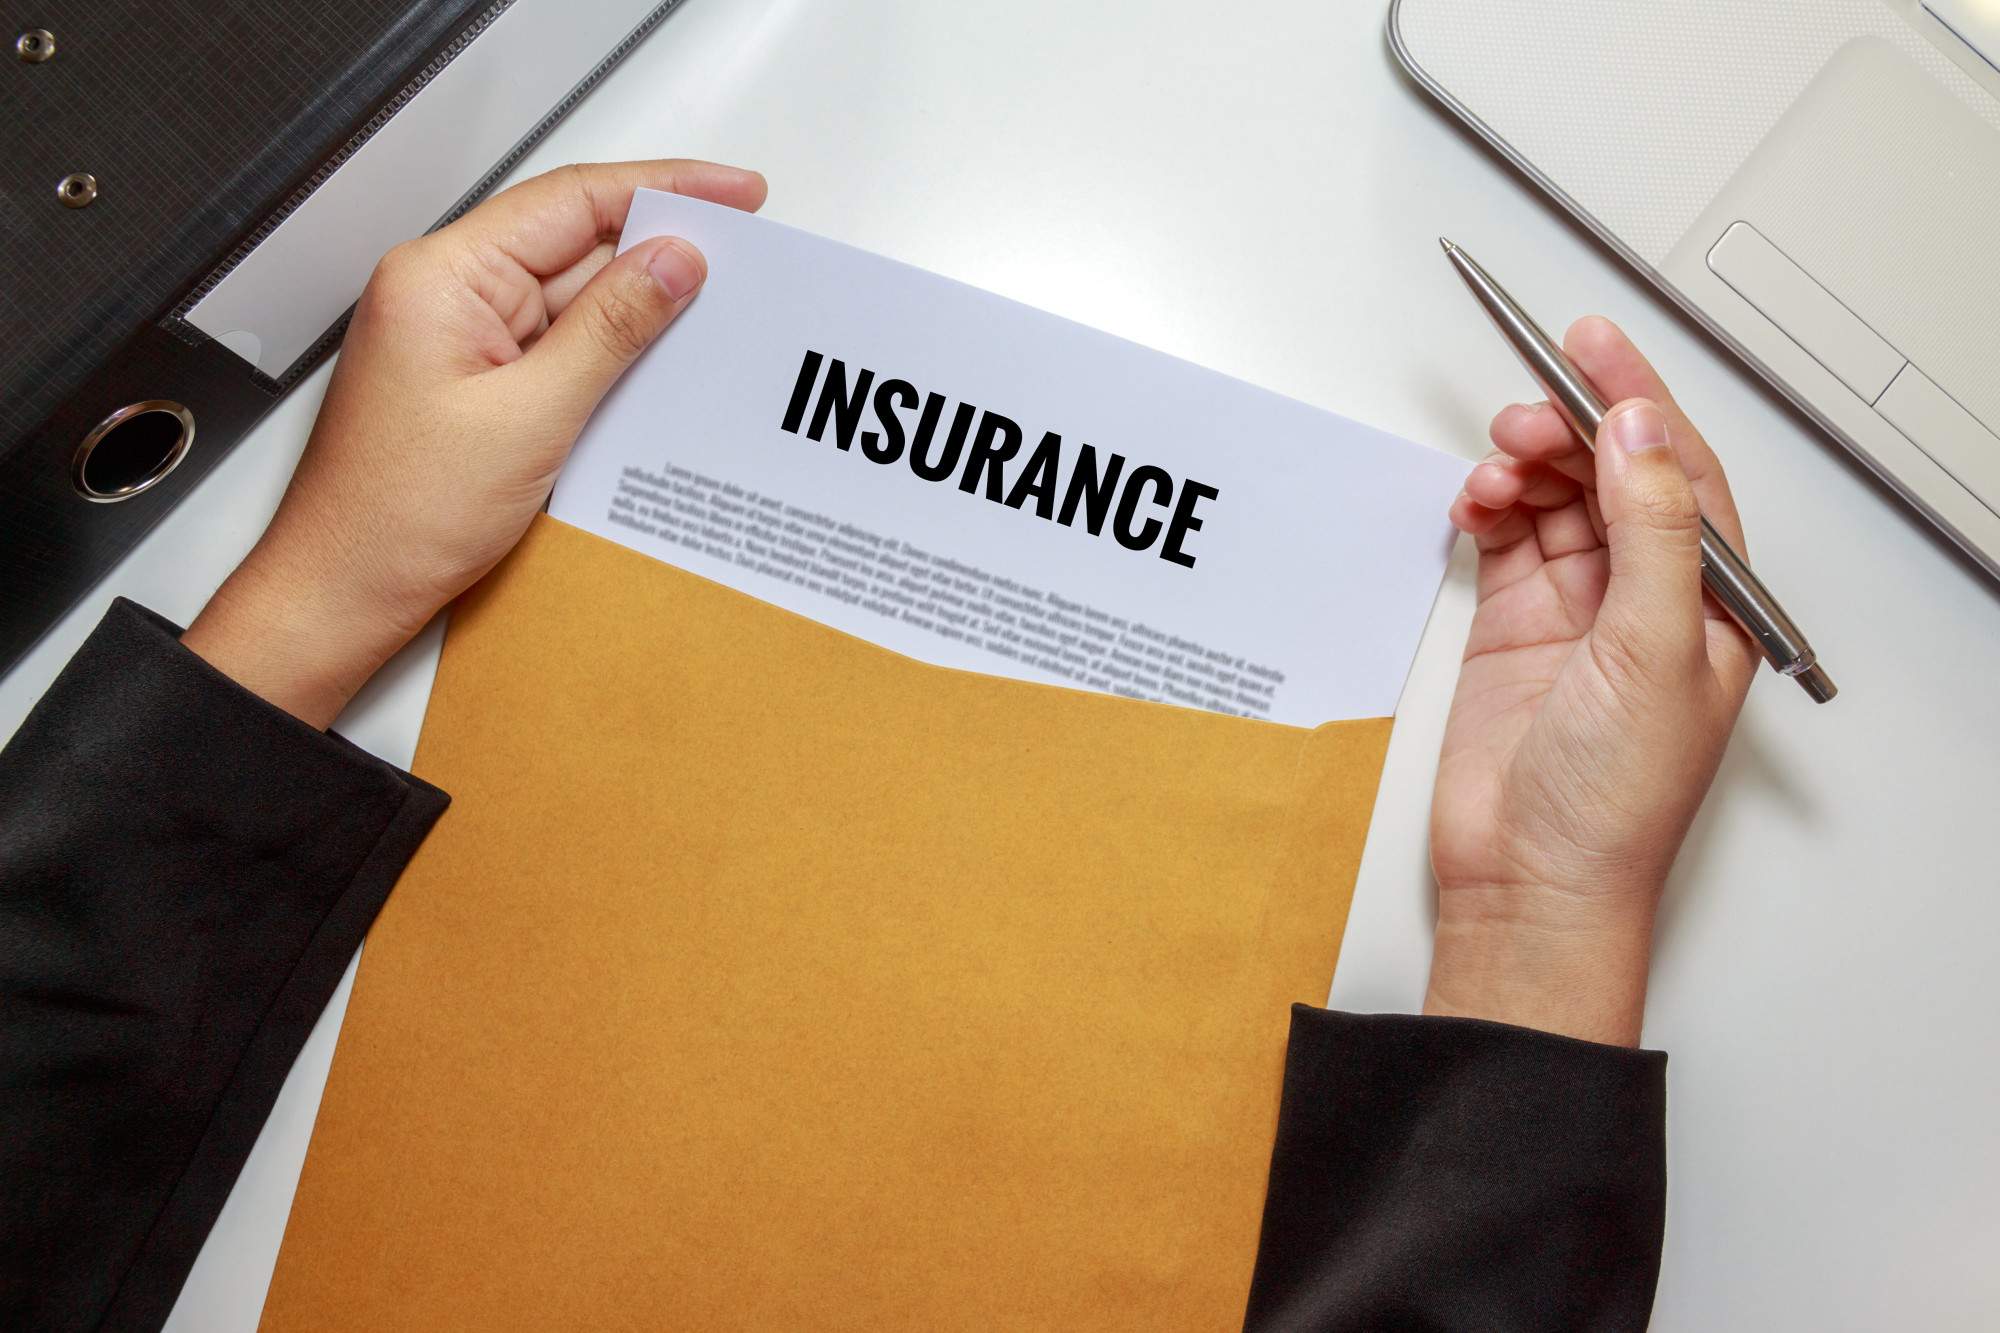 Protect Your Company: 5 Types of Insurance for Small Business